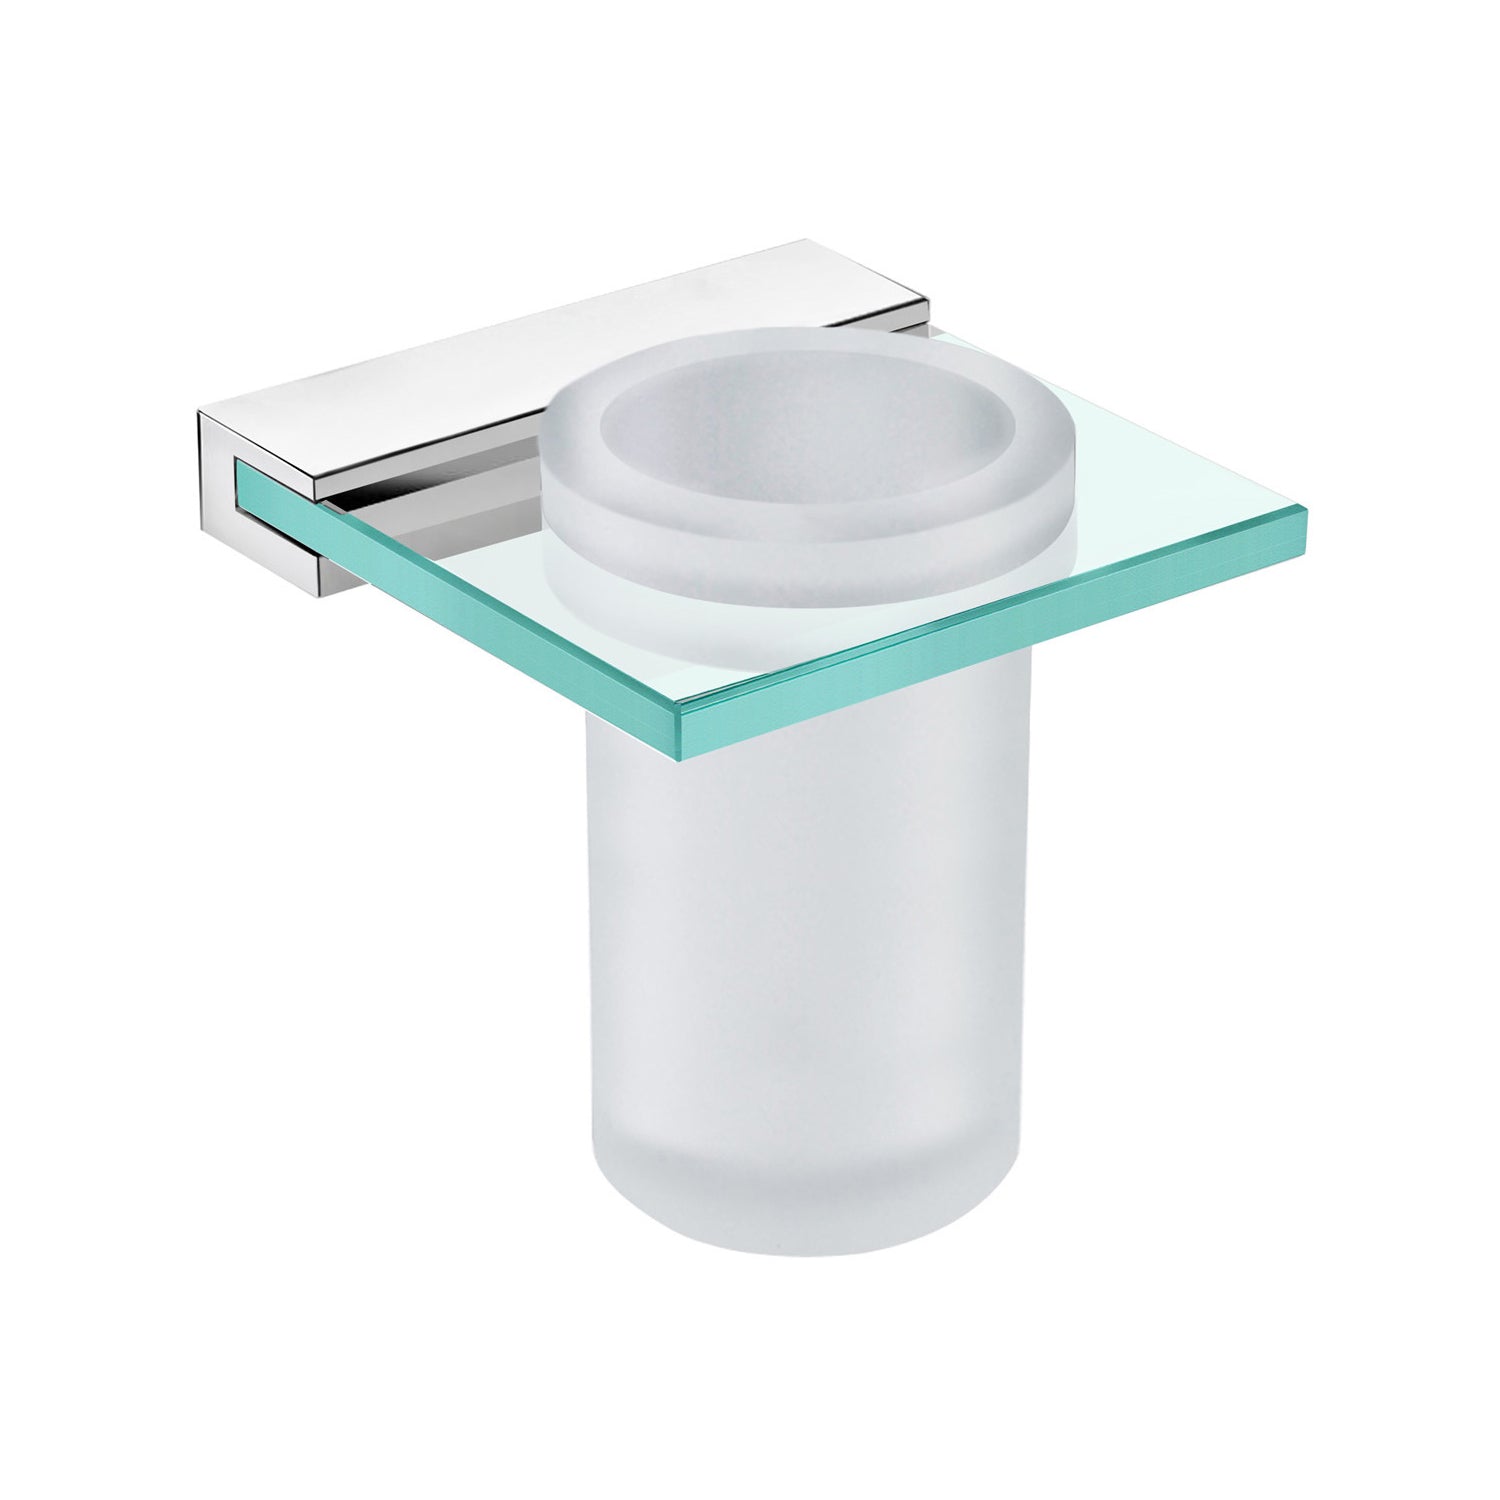 DAX Venice Bathroom Single Tumbler Toothbrush Holder, Wall Mount, Tempered Glass Cup with Clear Glass, Chrome Finish, 4-5/16 x 4-5/16 x 4-1/2 Inches (DAX-GDC060152-CR)